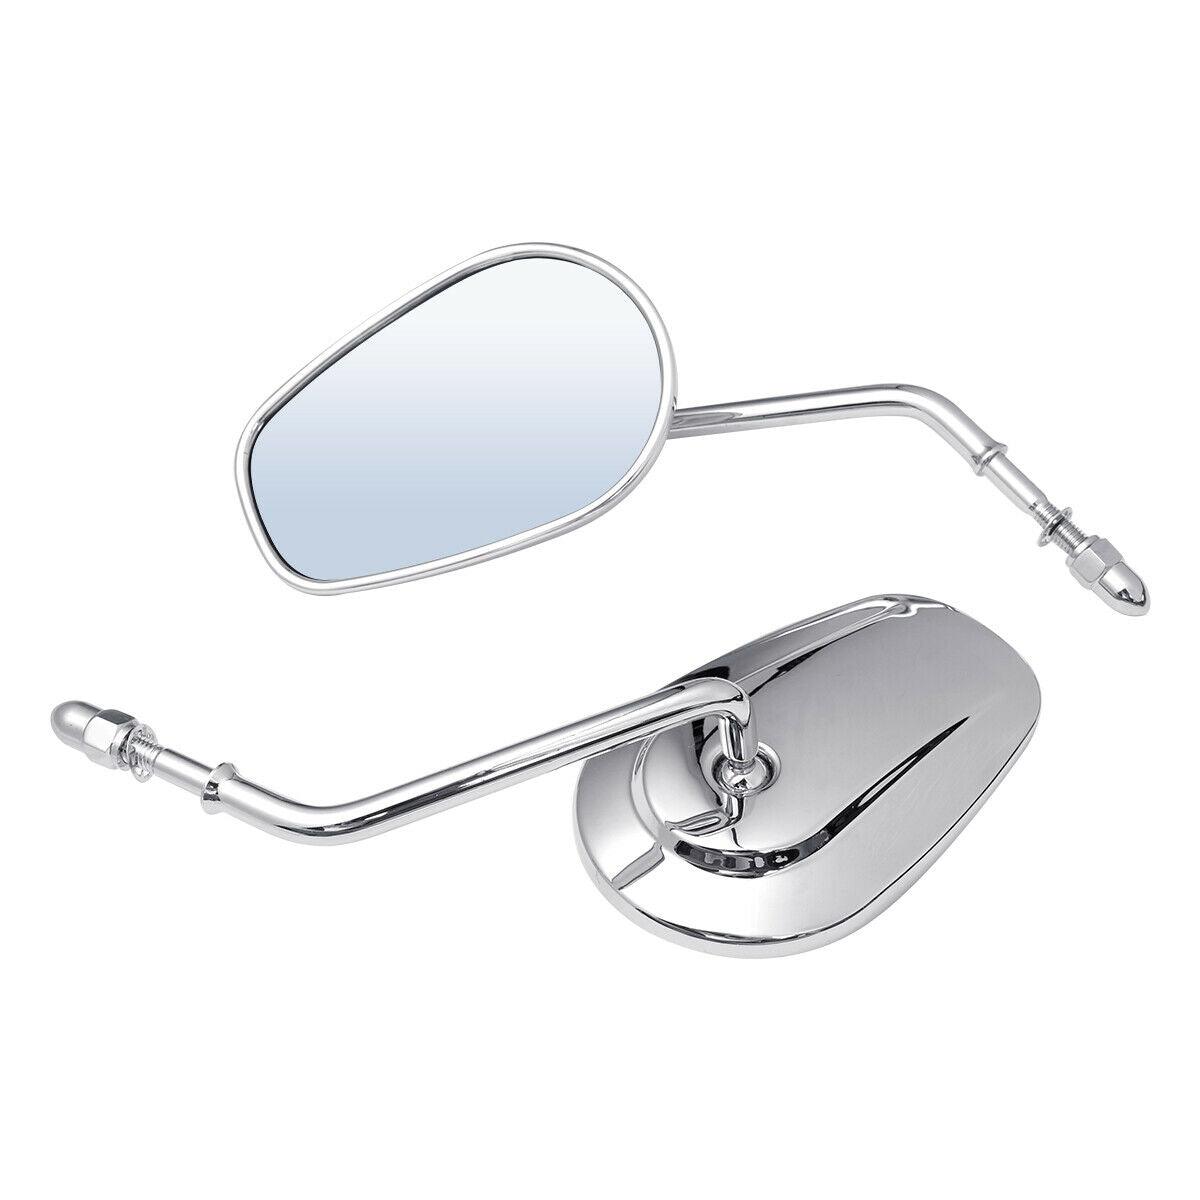 Chrome Rear View Mirrors For Harley Davidson Sportster XL 1200 883 FLSTC FLSTF - Moto Life Products